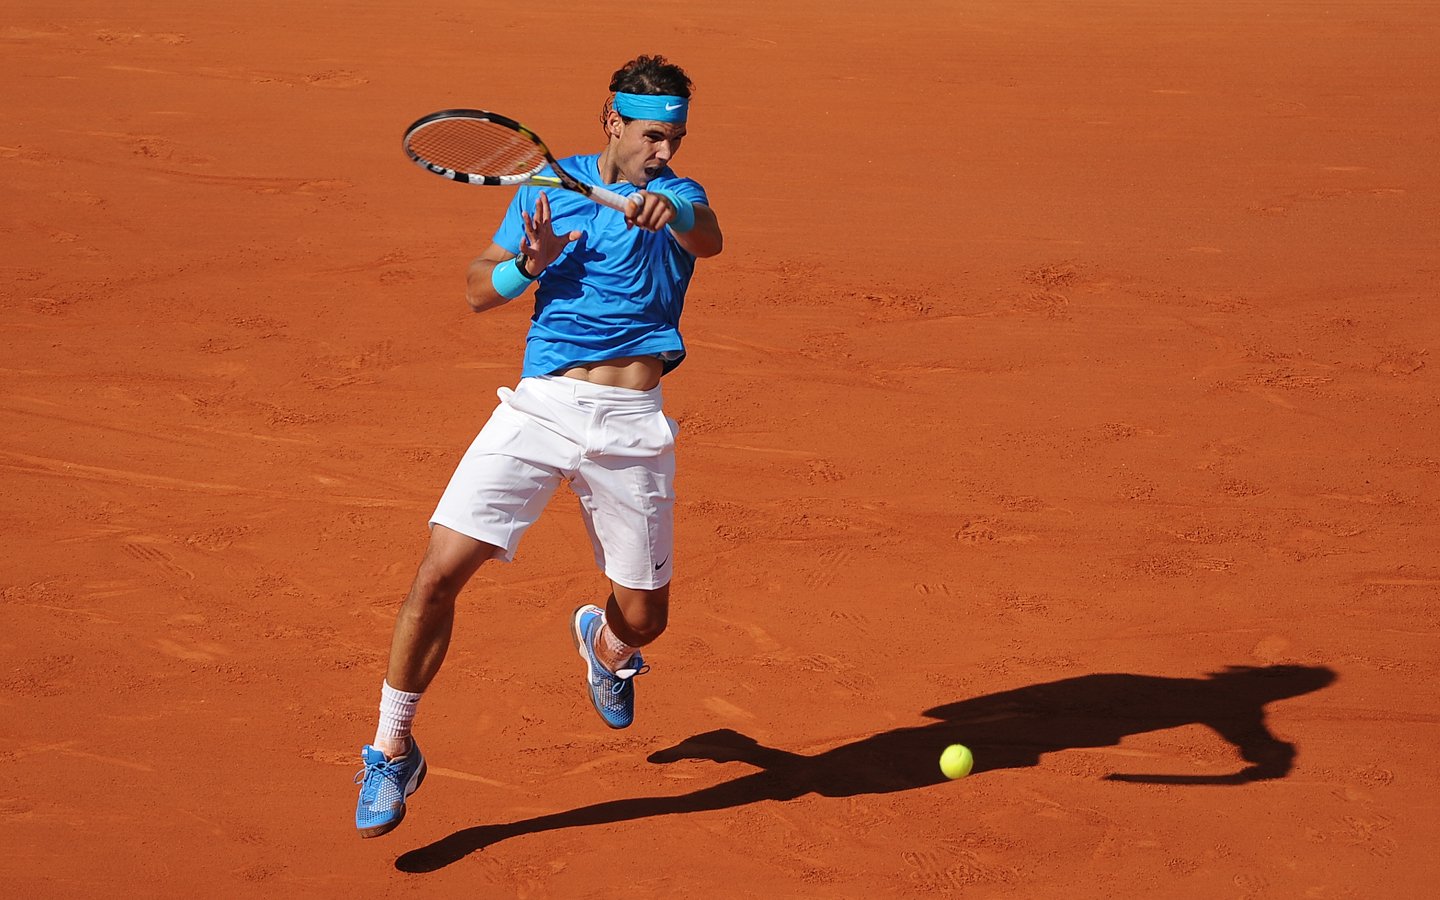 Nadal-vs-Paire-French-Open-preview-featured-image.jpg